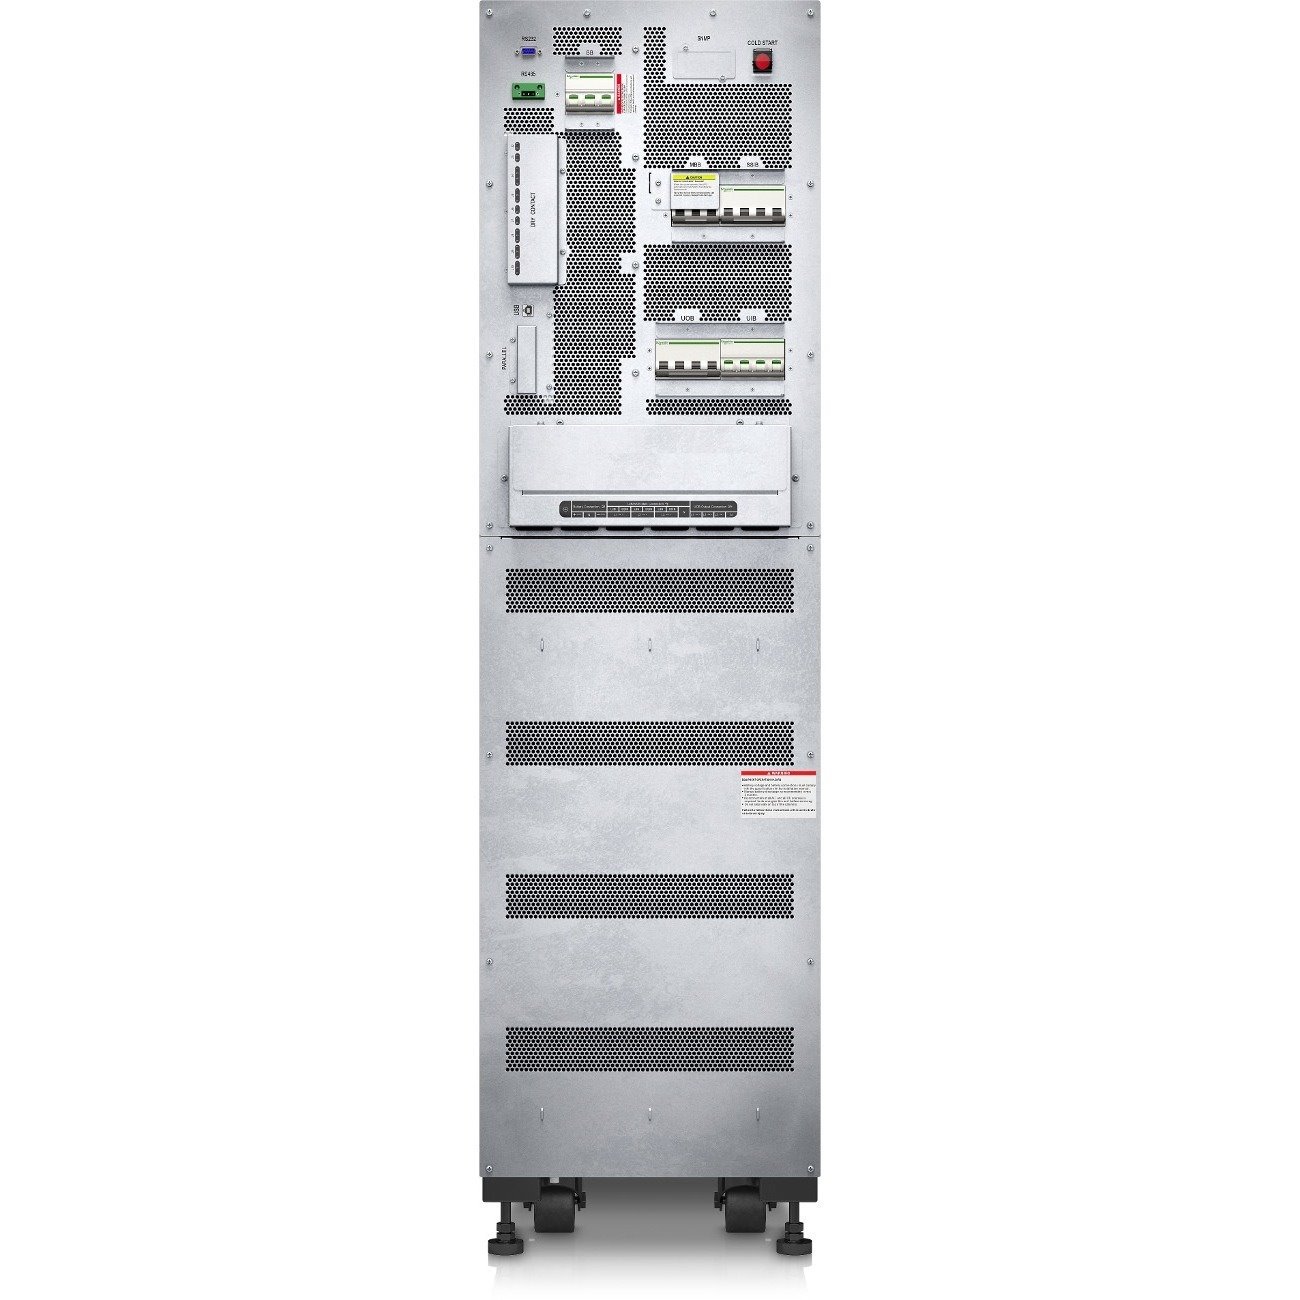 Schneider Electric Easy UPS 3S Double Conversion Online UPS - 15 kVA/15 kW - Three Phase